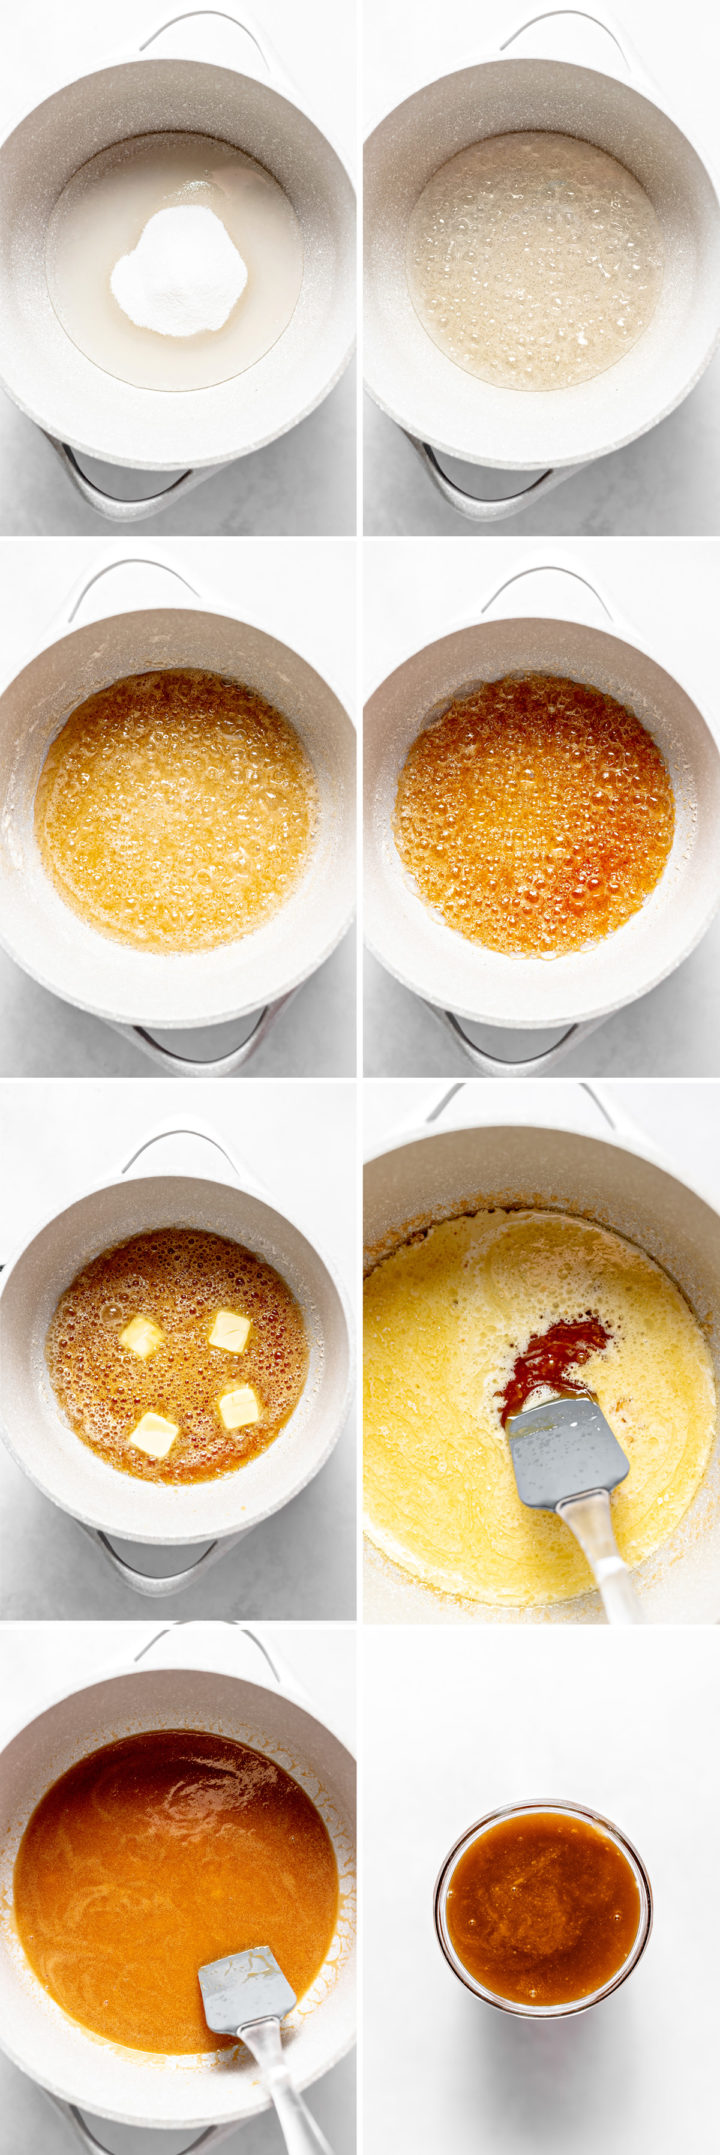 step by step photos of how to make caramel sauce with rum